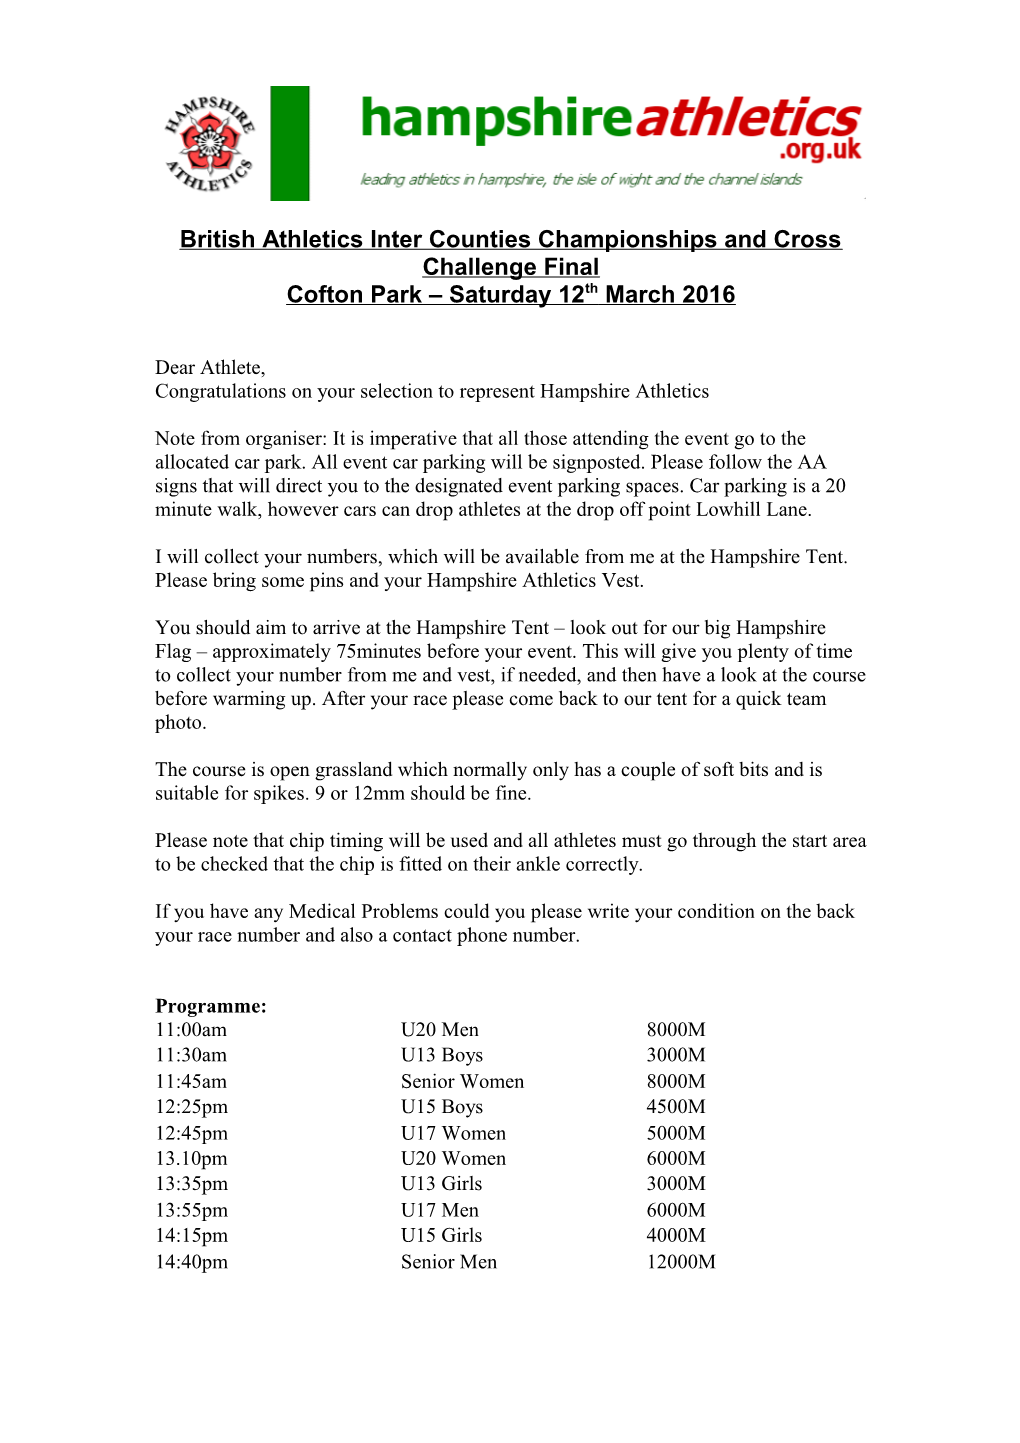 British Athletics Inter Counties Championships and Cross Challenge Final